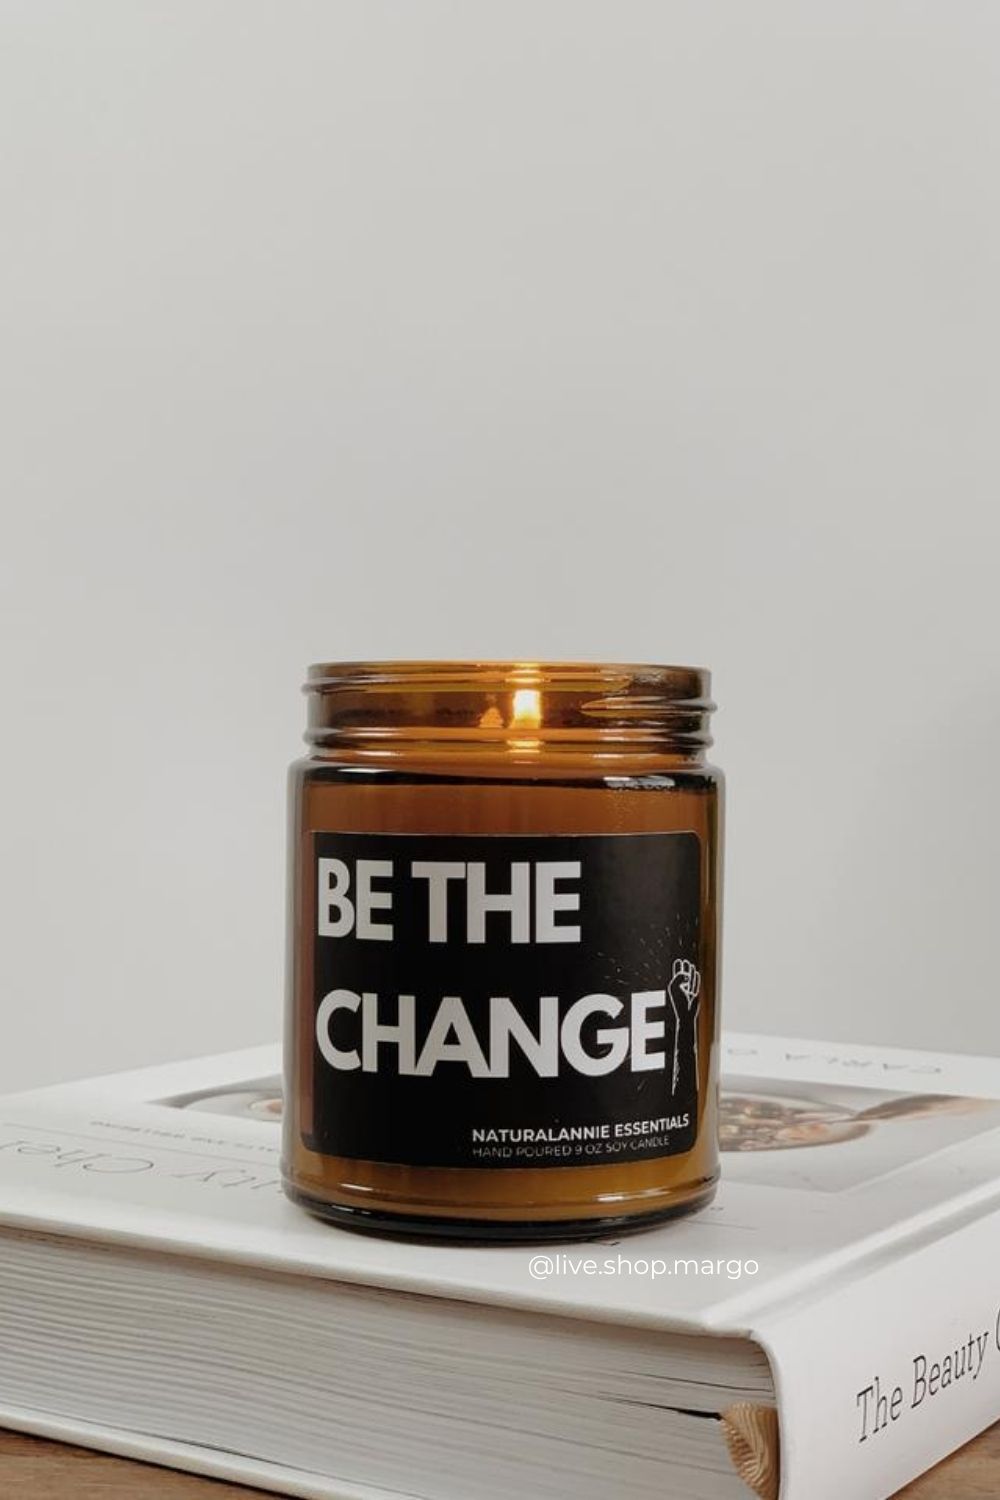 be the change naturalannie essentials soy candle